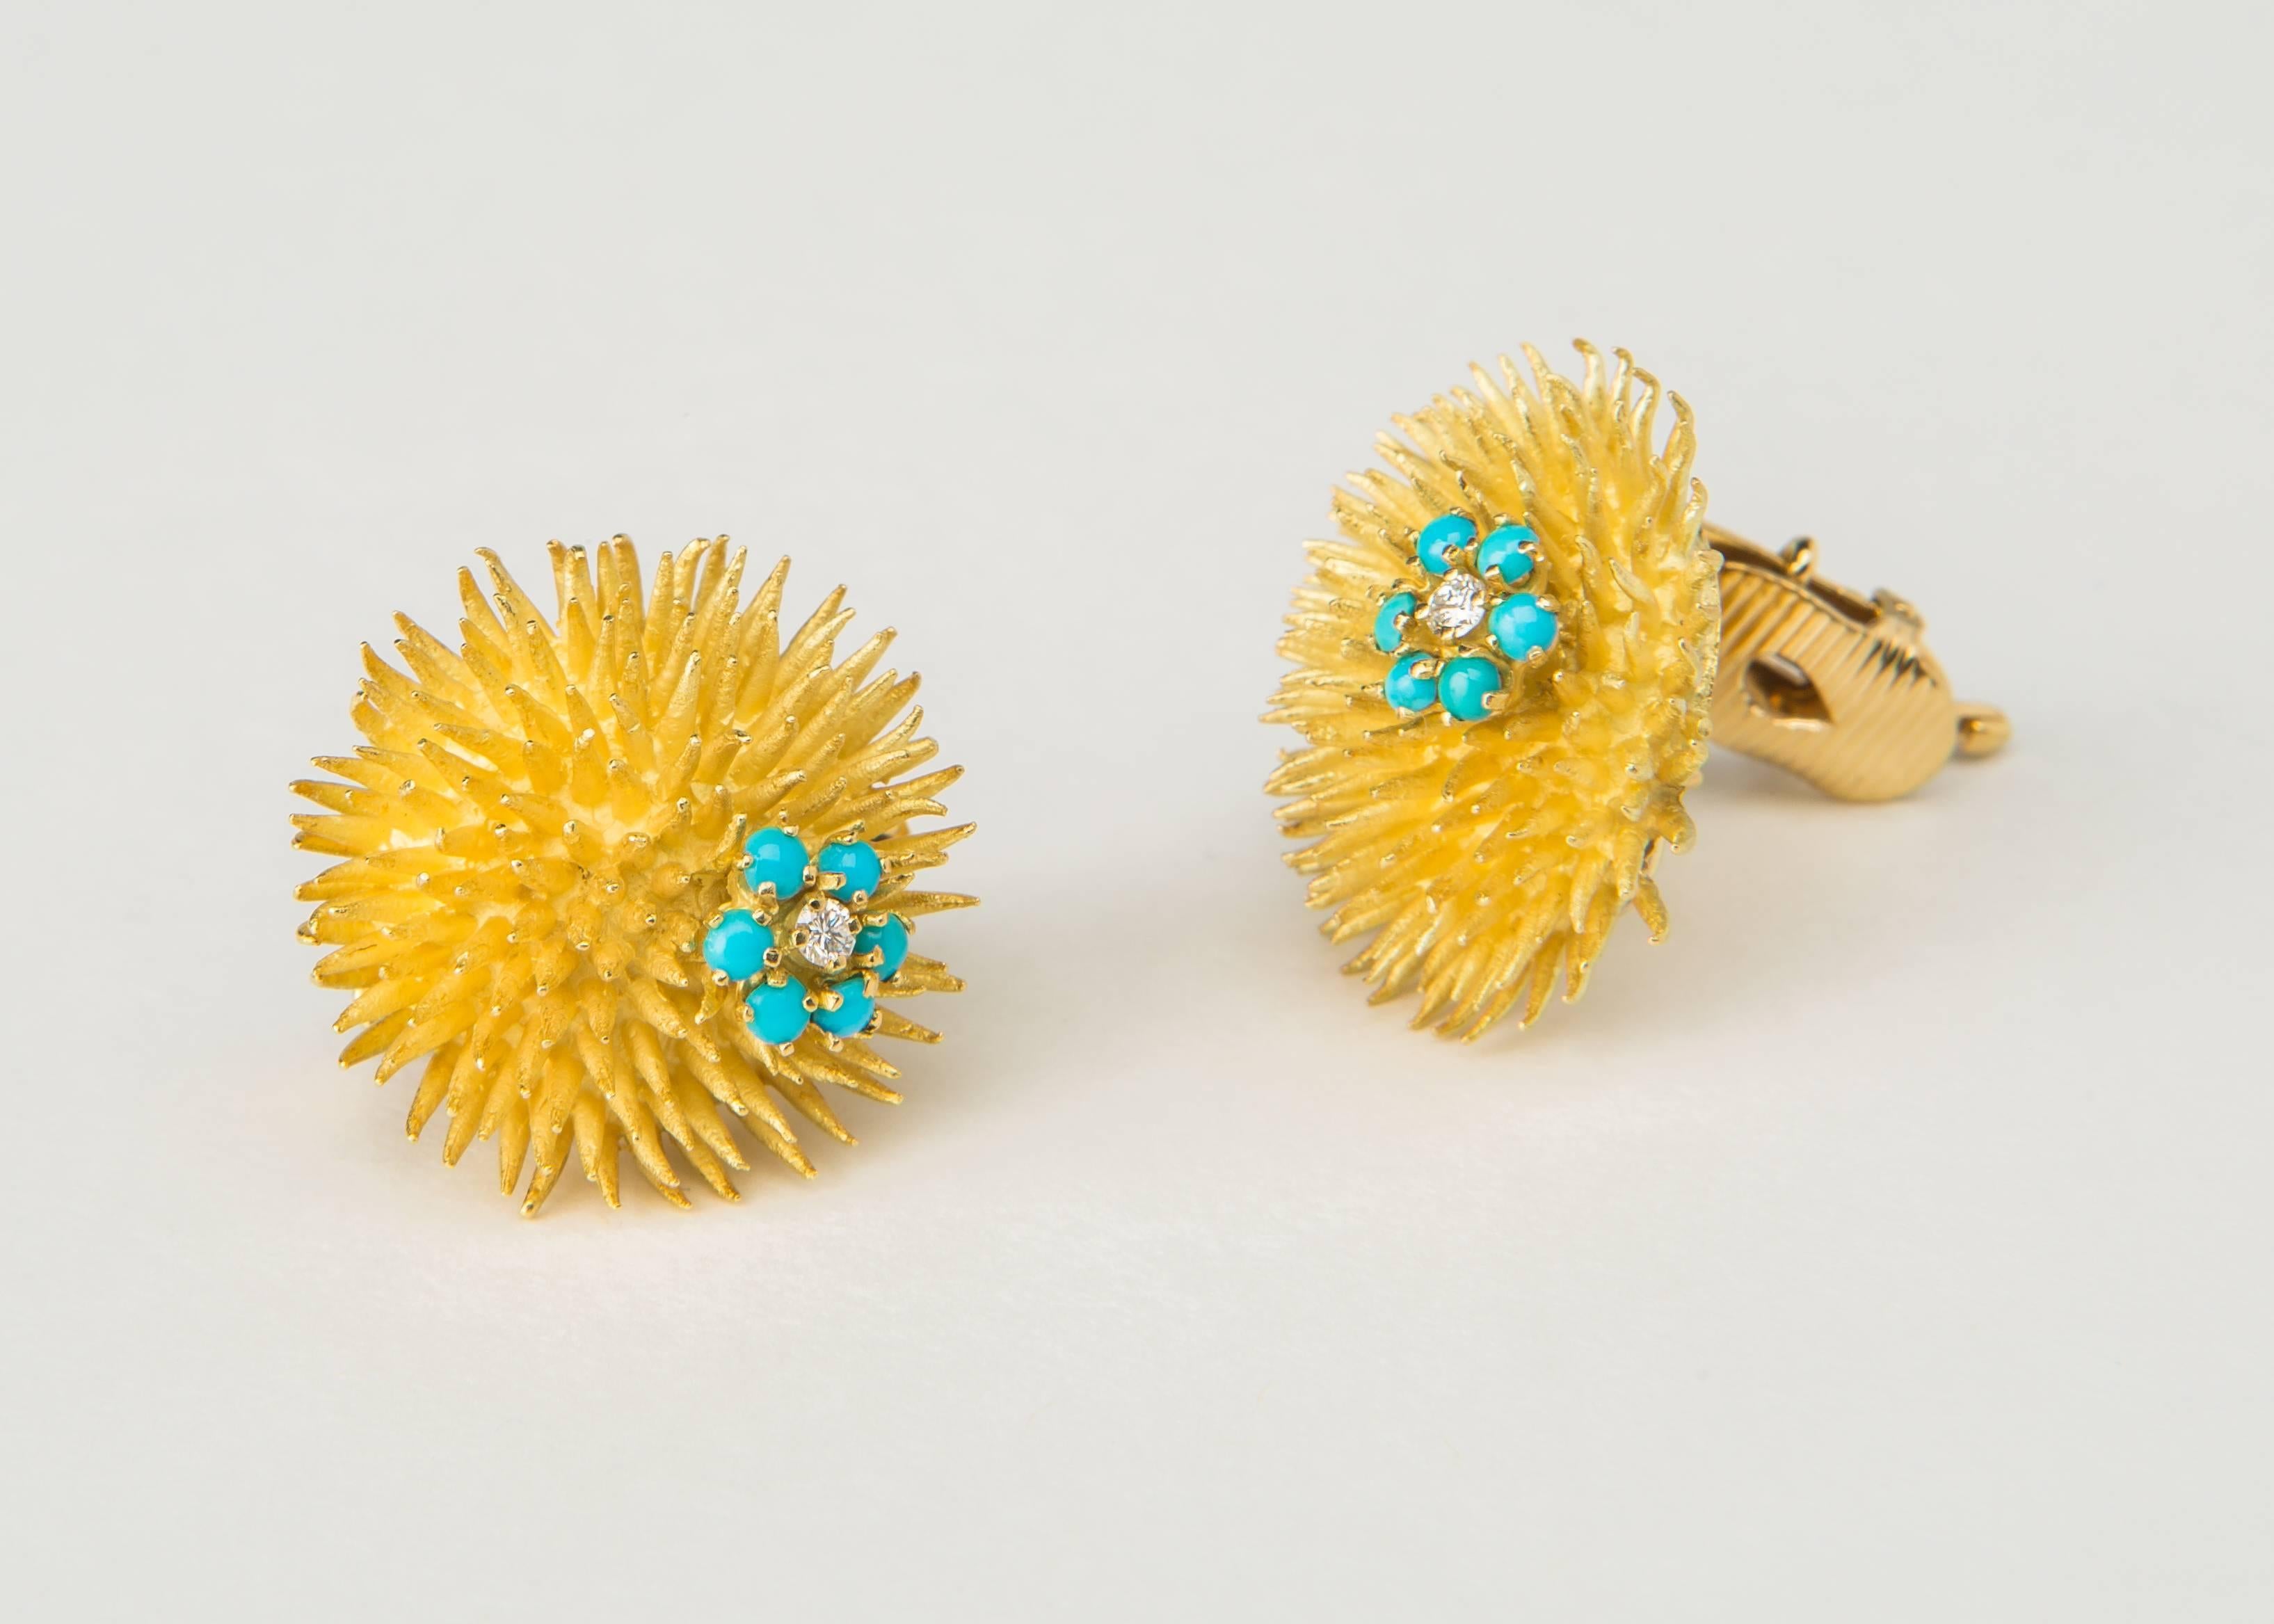 A rare and hard to find example of Jean Schlumberger's genius. His bold chic version of a sea urchin is accented with turquoise and diamonds. This classic size measures 7/8's of an inch